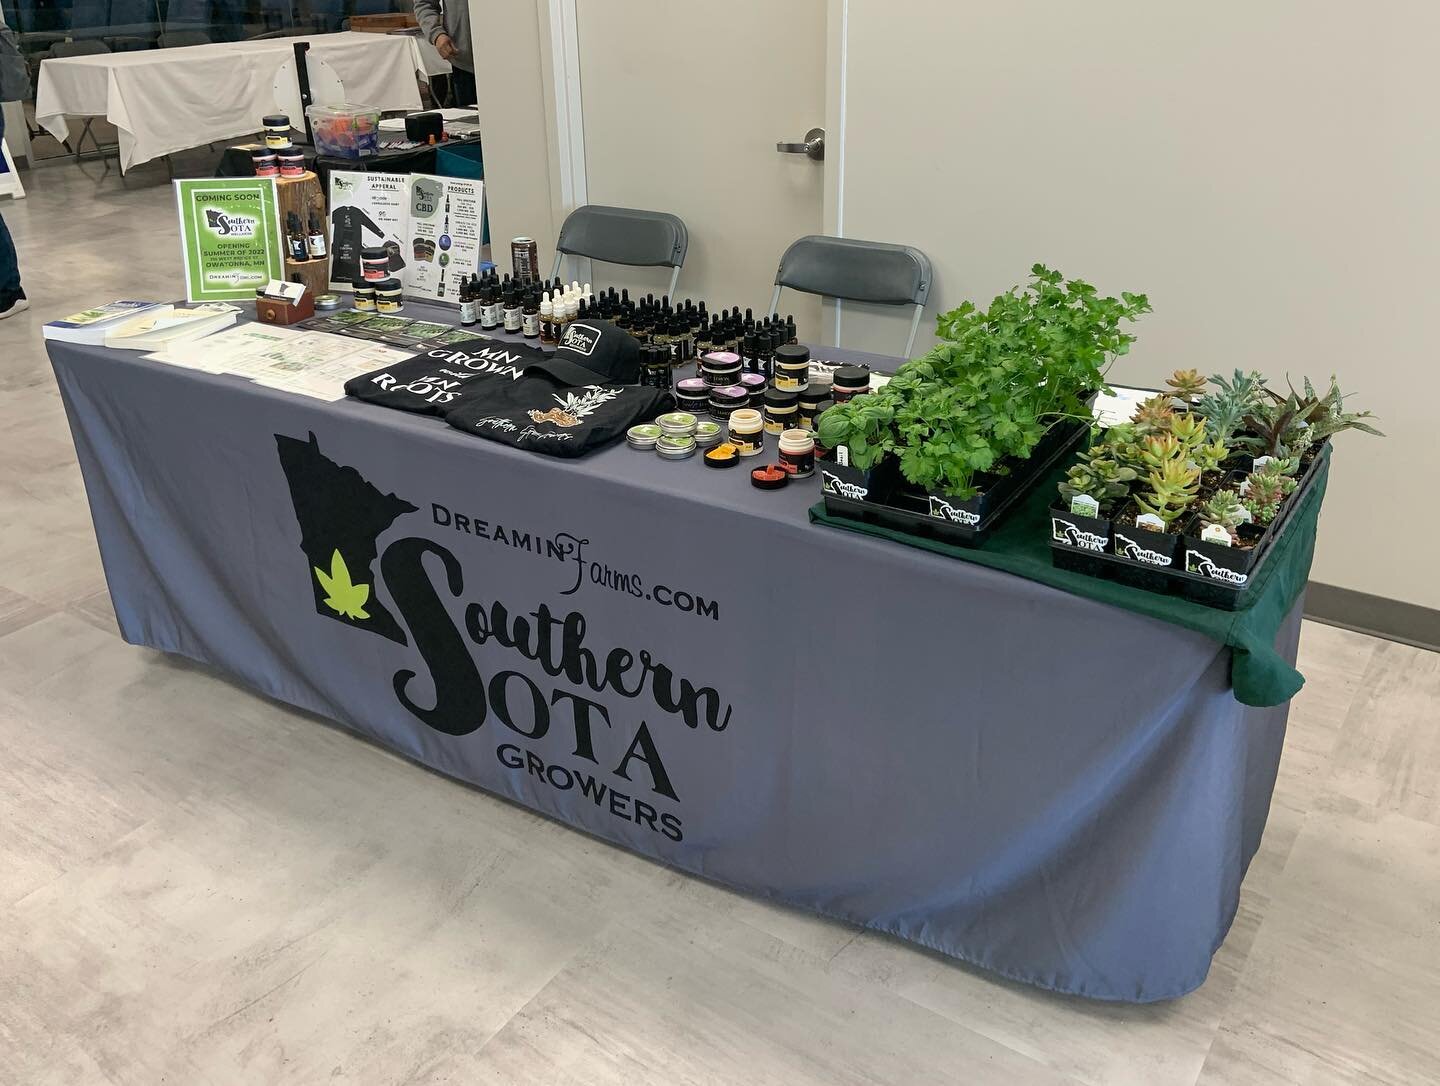 We are at @big.stone.therapies located at 2440 Bridge Ave in Albert Le𝗮 until 2 pm today! 
🙌🌱🧠💪👊♻️.
&bull;
Food and prizes available! 
&bull;
#bigstonetherapies #albertlea #minnesota #health 
#wellnessfair 😁 @dreaminfarms